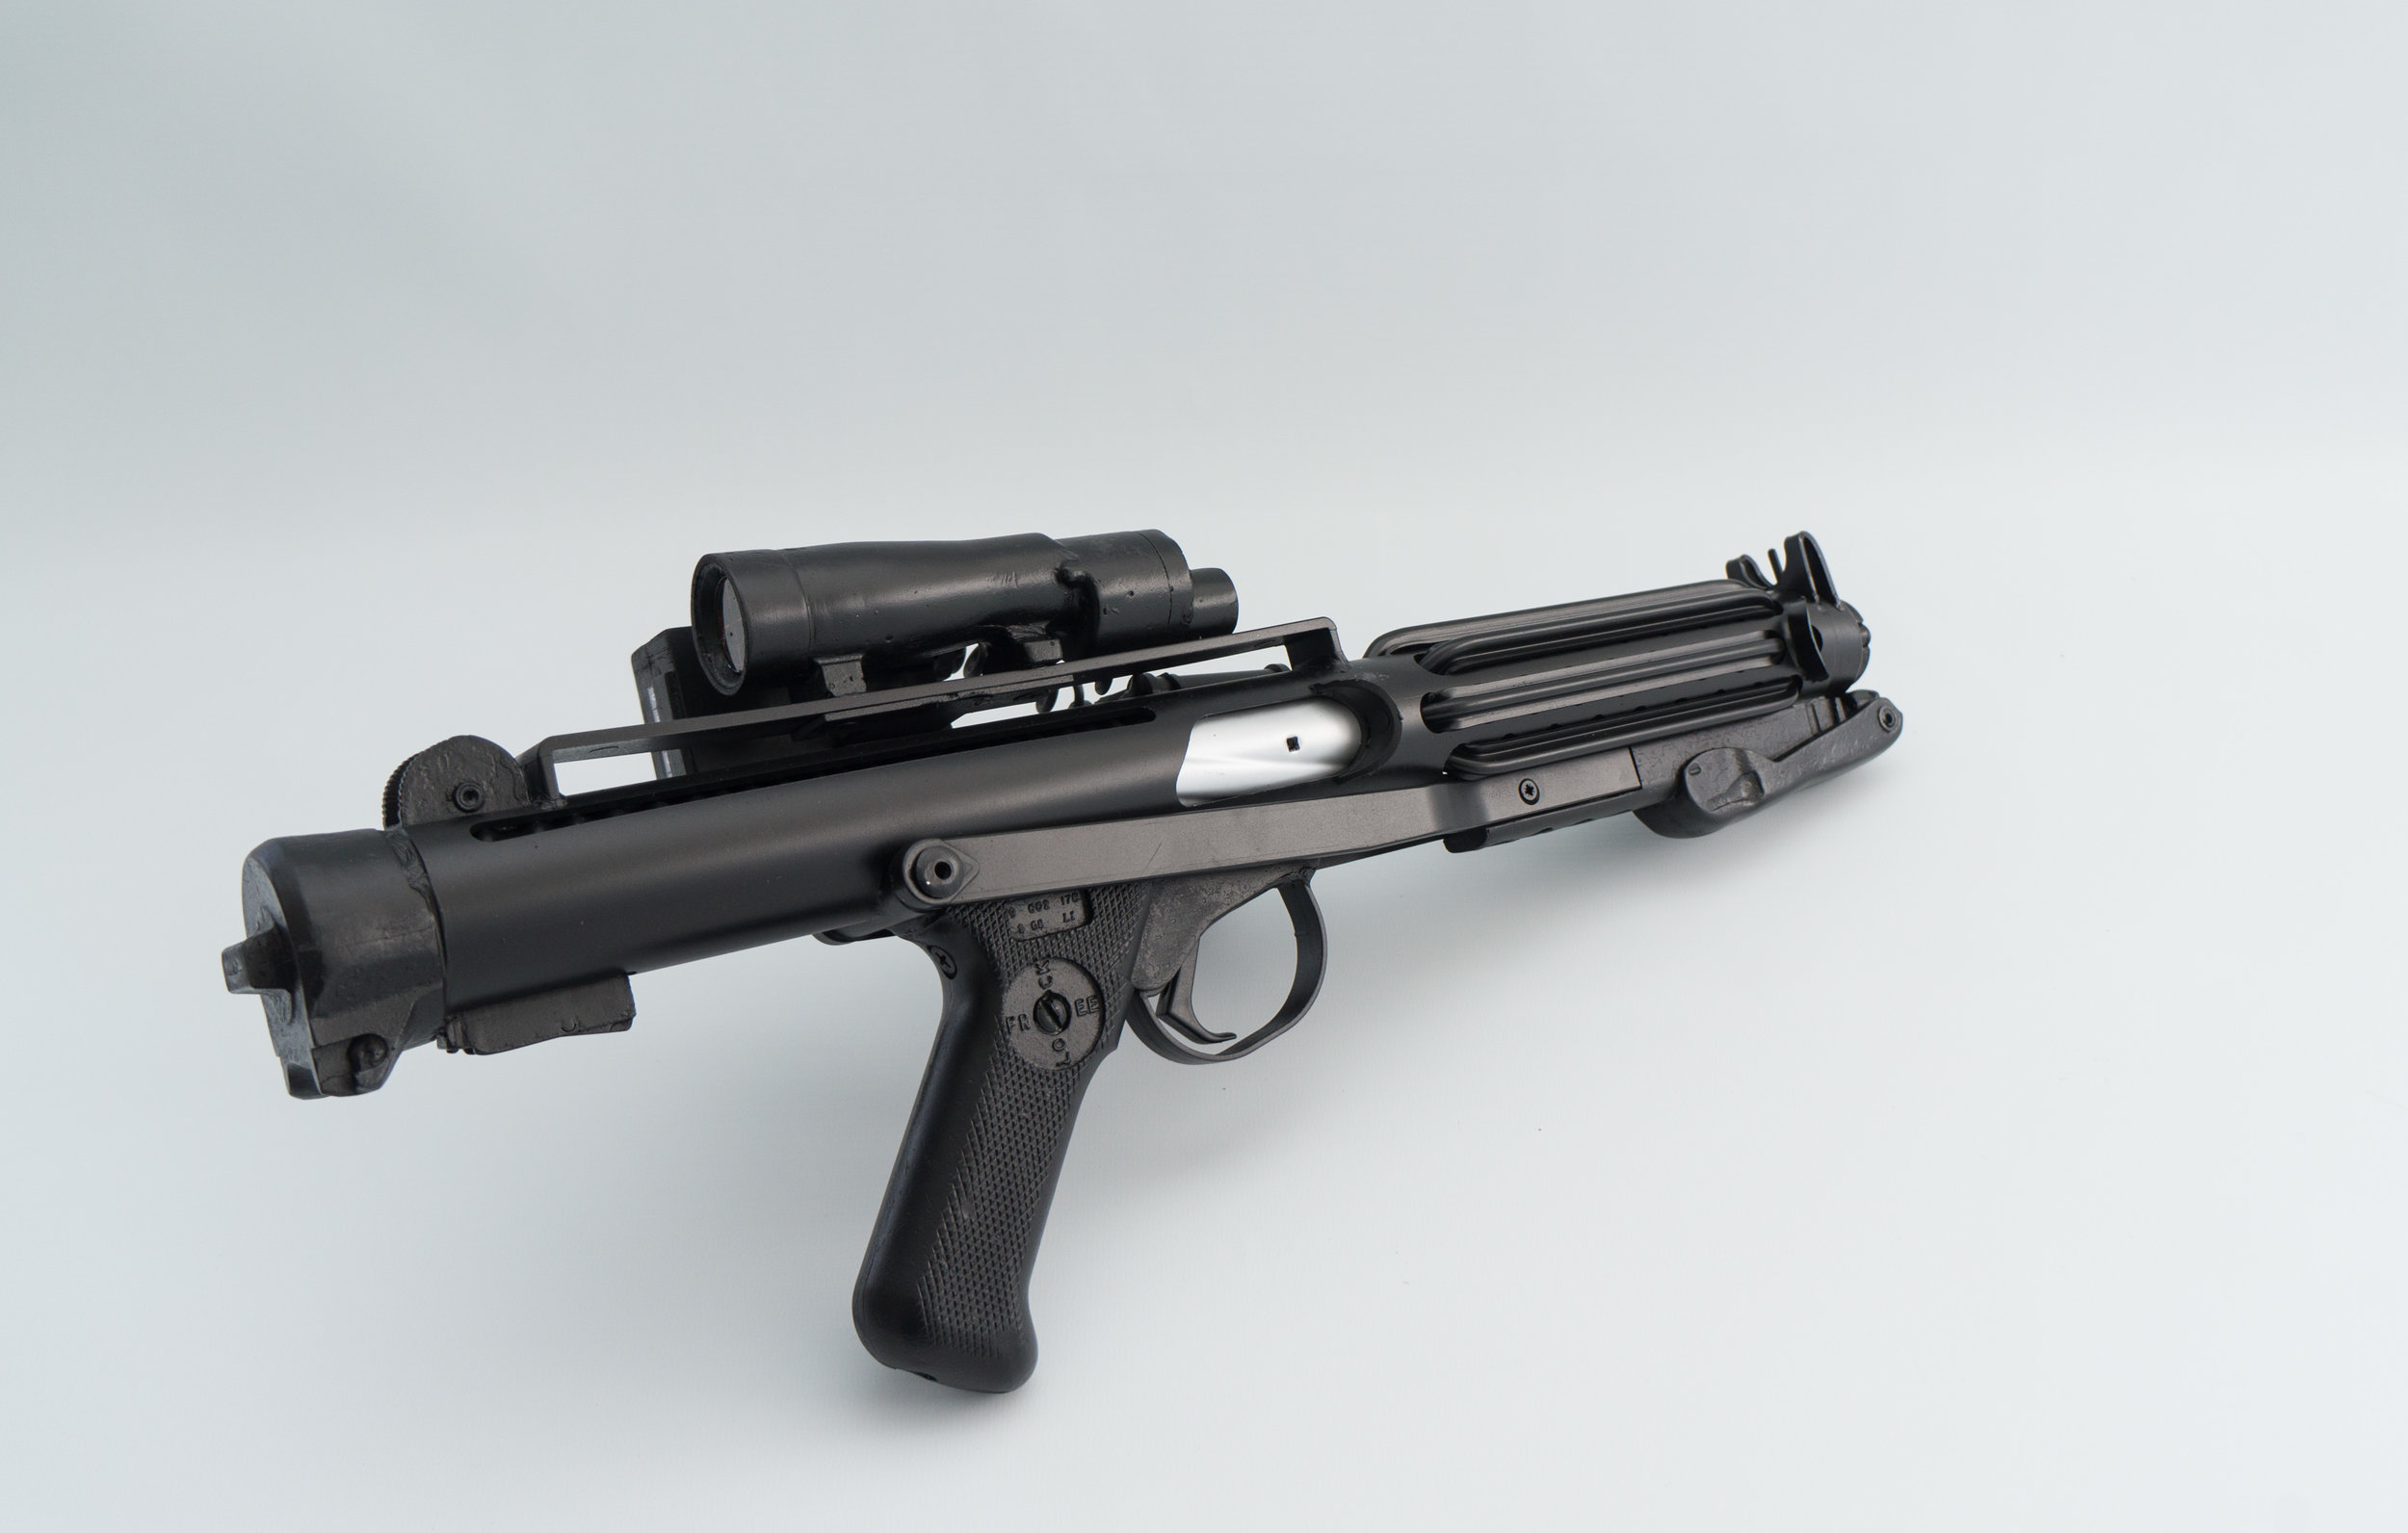 Royal Armouries special edition E11 Stormtrooper blaster